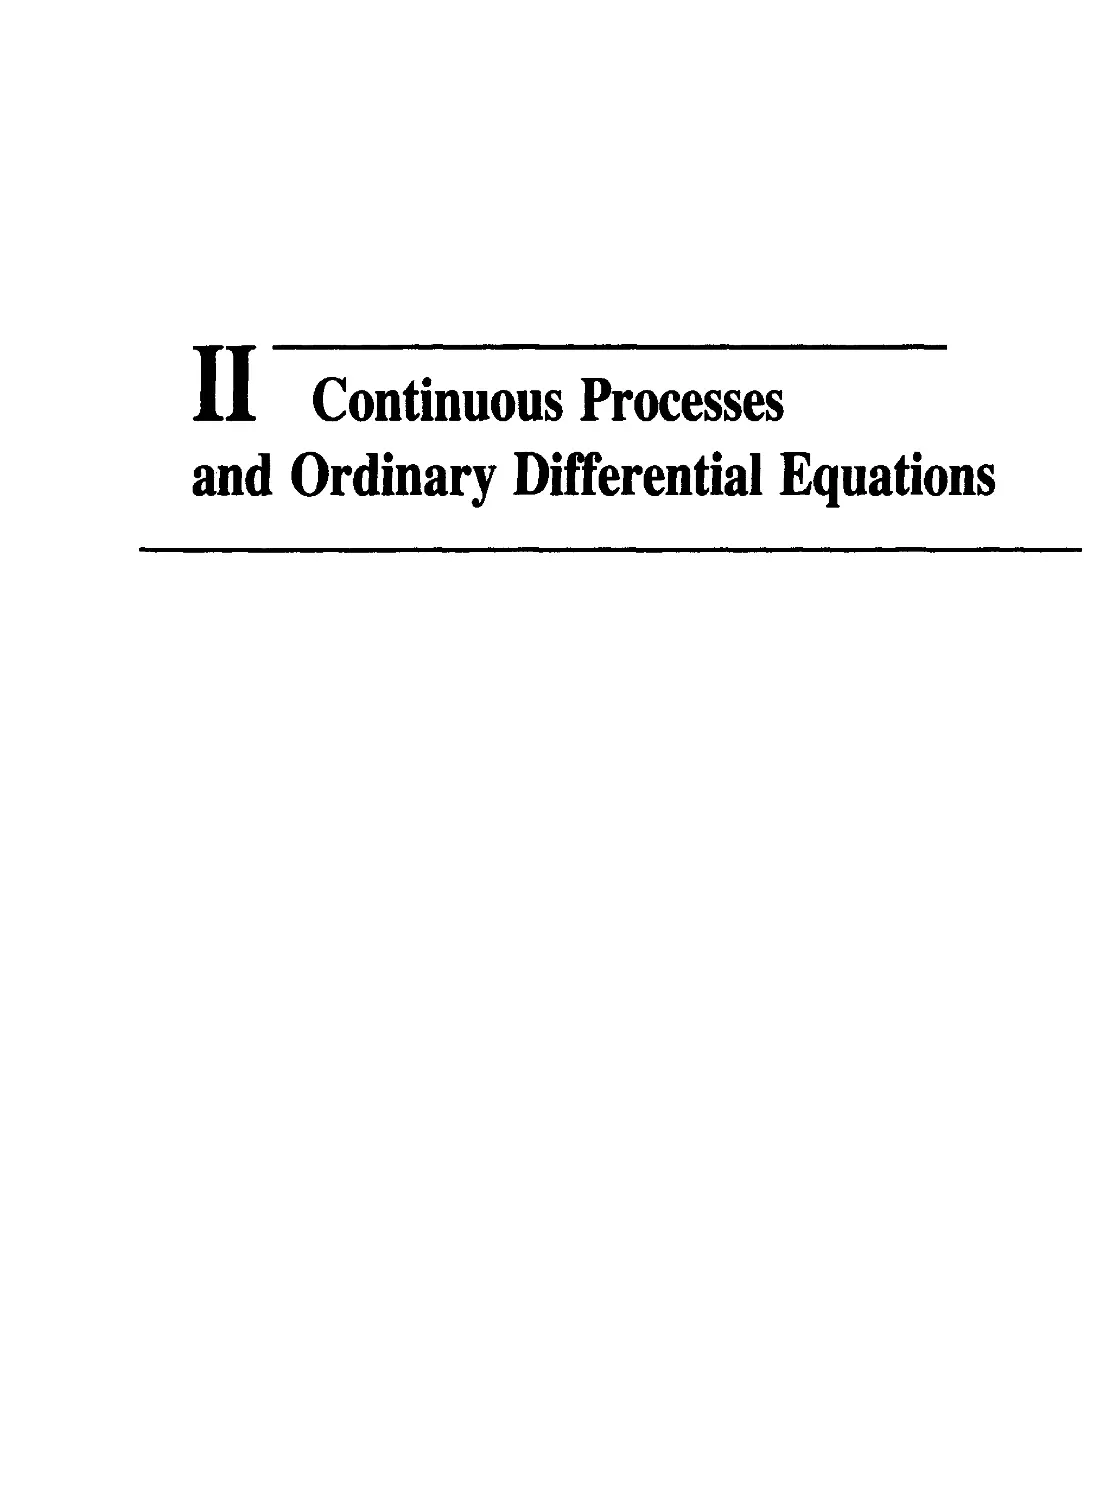 Part II Continuous Processes and Ordinary Differential Equations